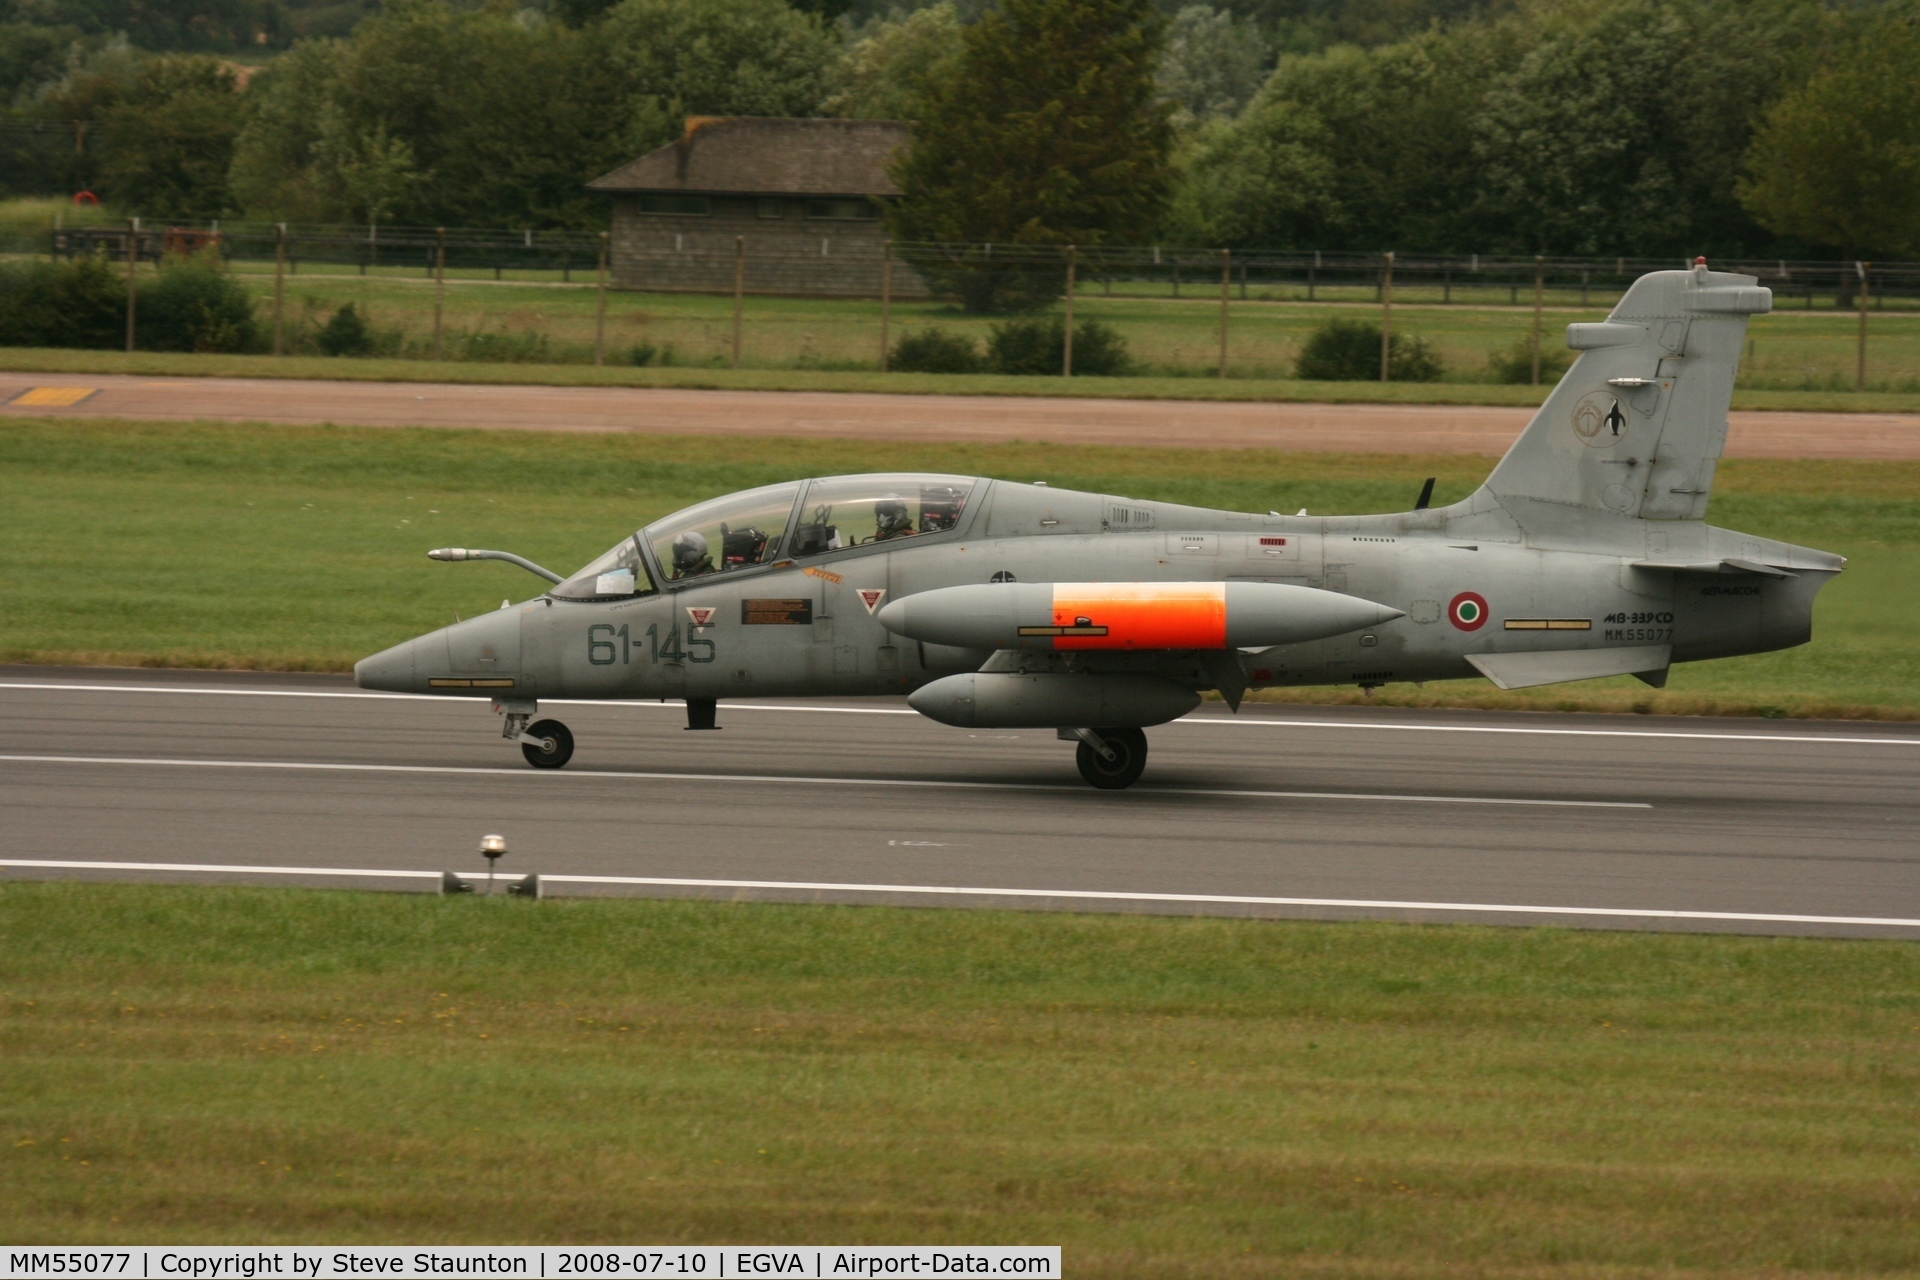 MM55077, Aermacchi MB-339CD C/N 213/CD016, Taken at the Royal International Air Tattoo 2008 during arrivals and departures (show days cancelled due to bad weather)